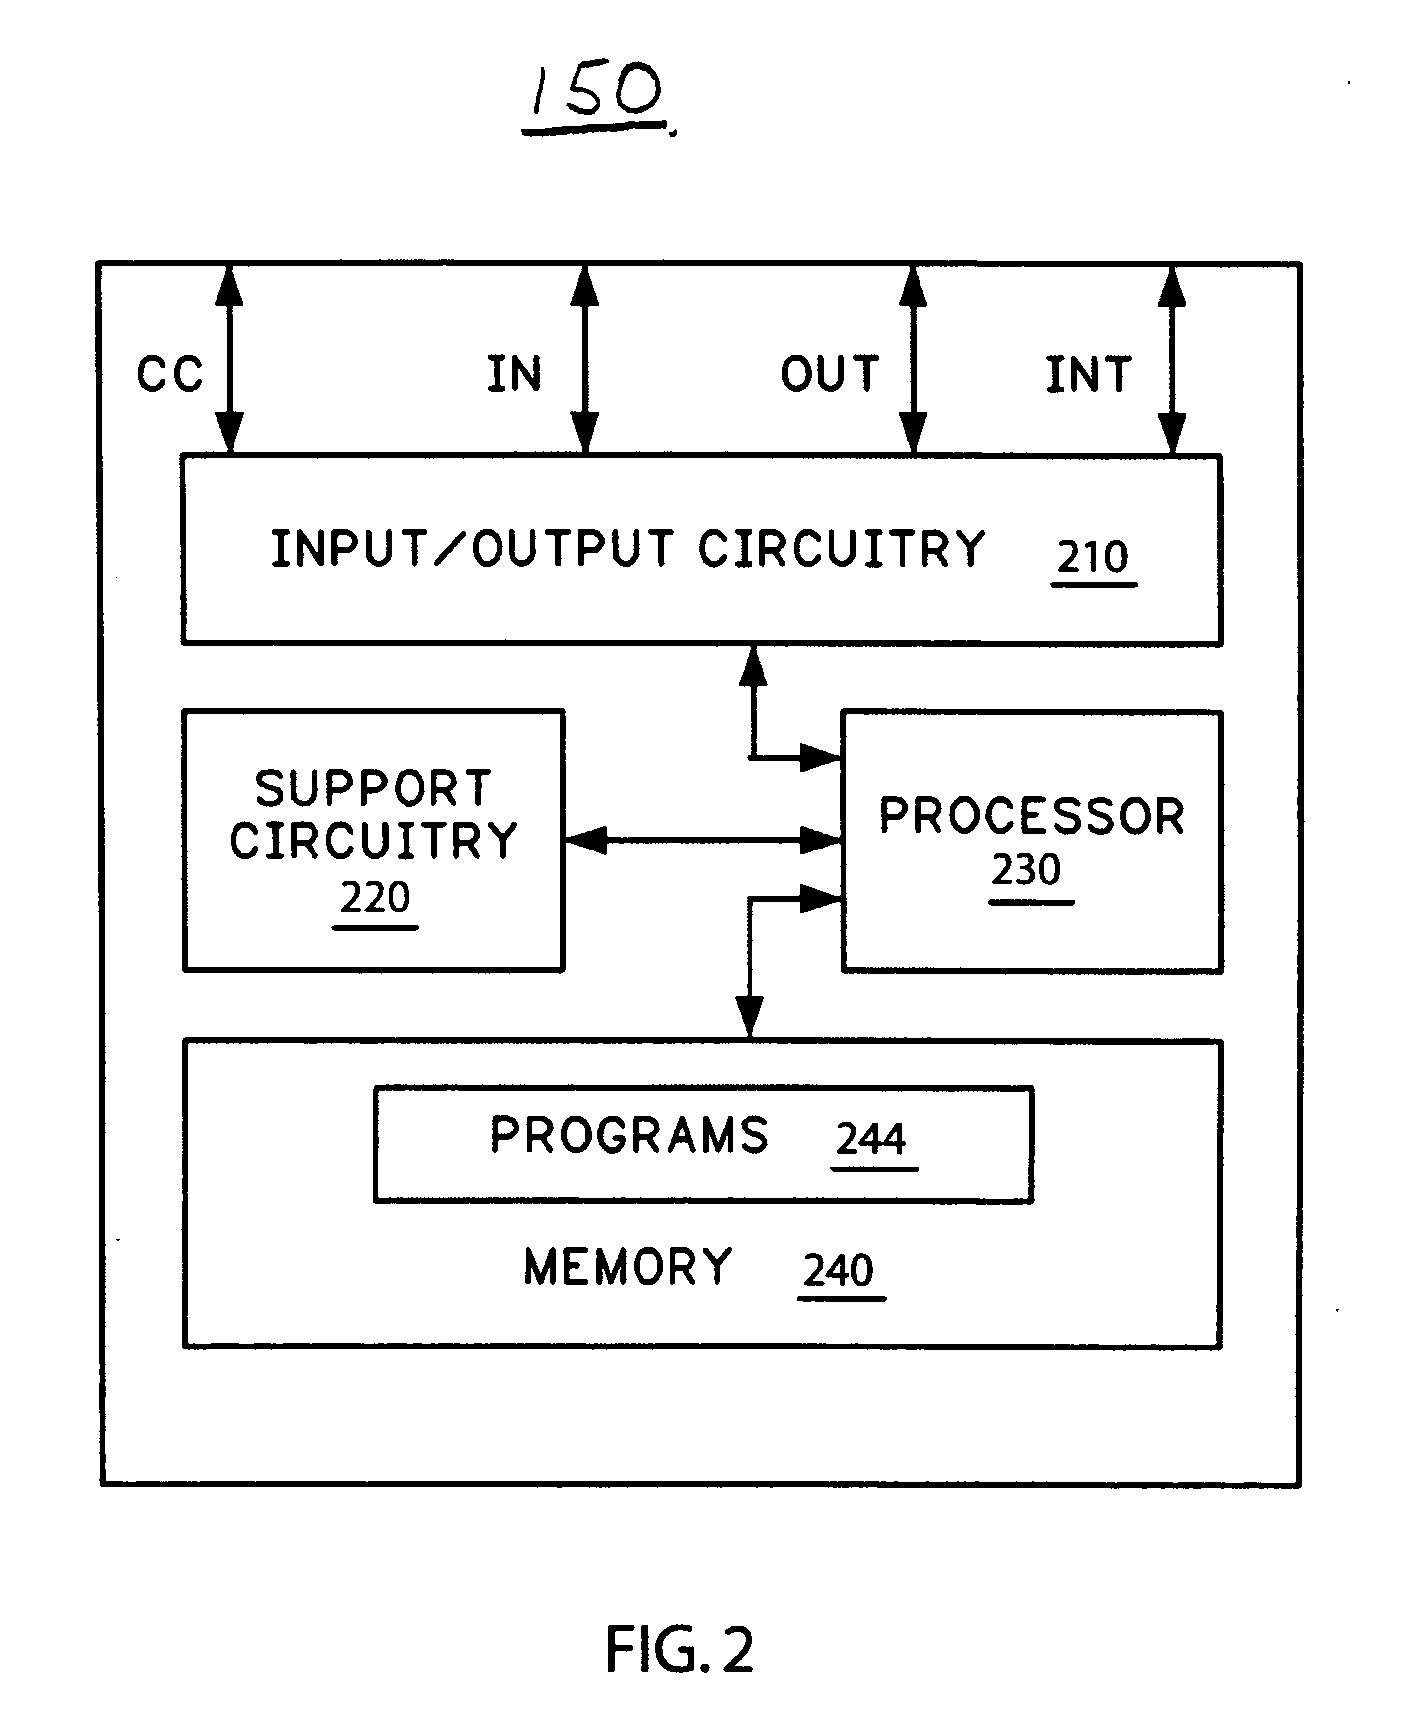 Method and apparatus for identifying similar events in long data records